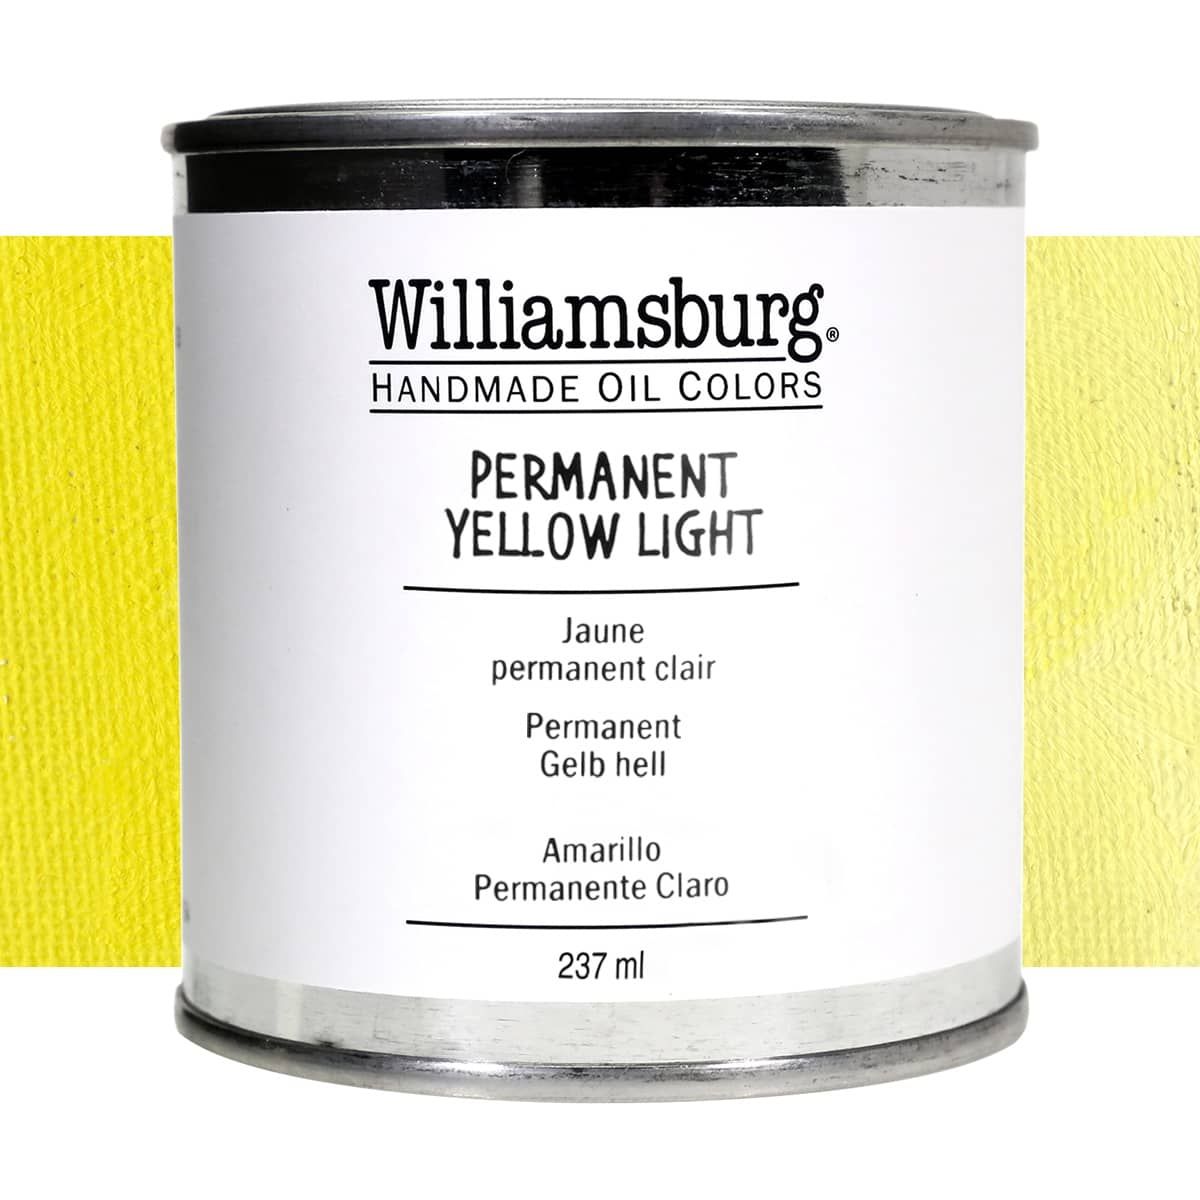 Williamsburg Oil Color 237 ml Can Permanent Yellow Light